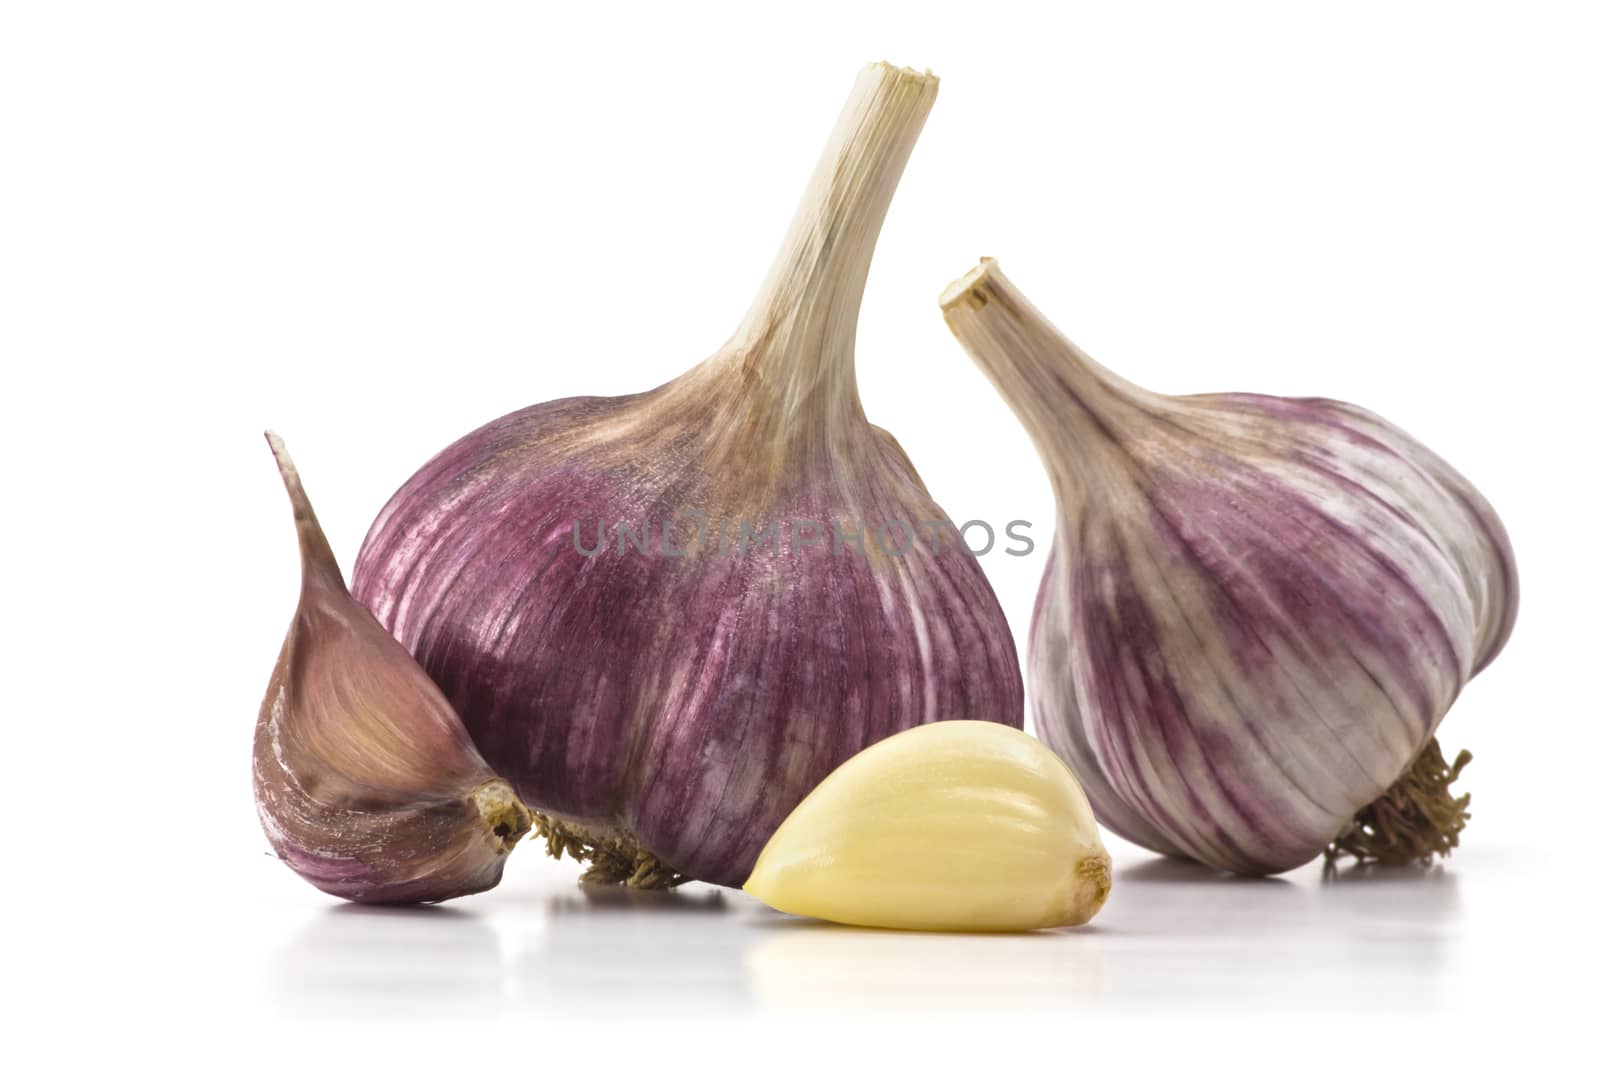 heads of garlic and garlic cloves on a white background